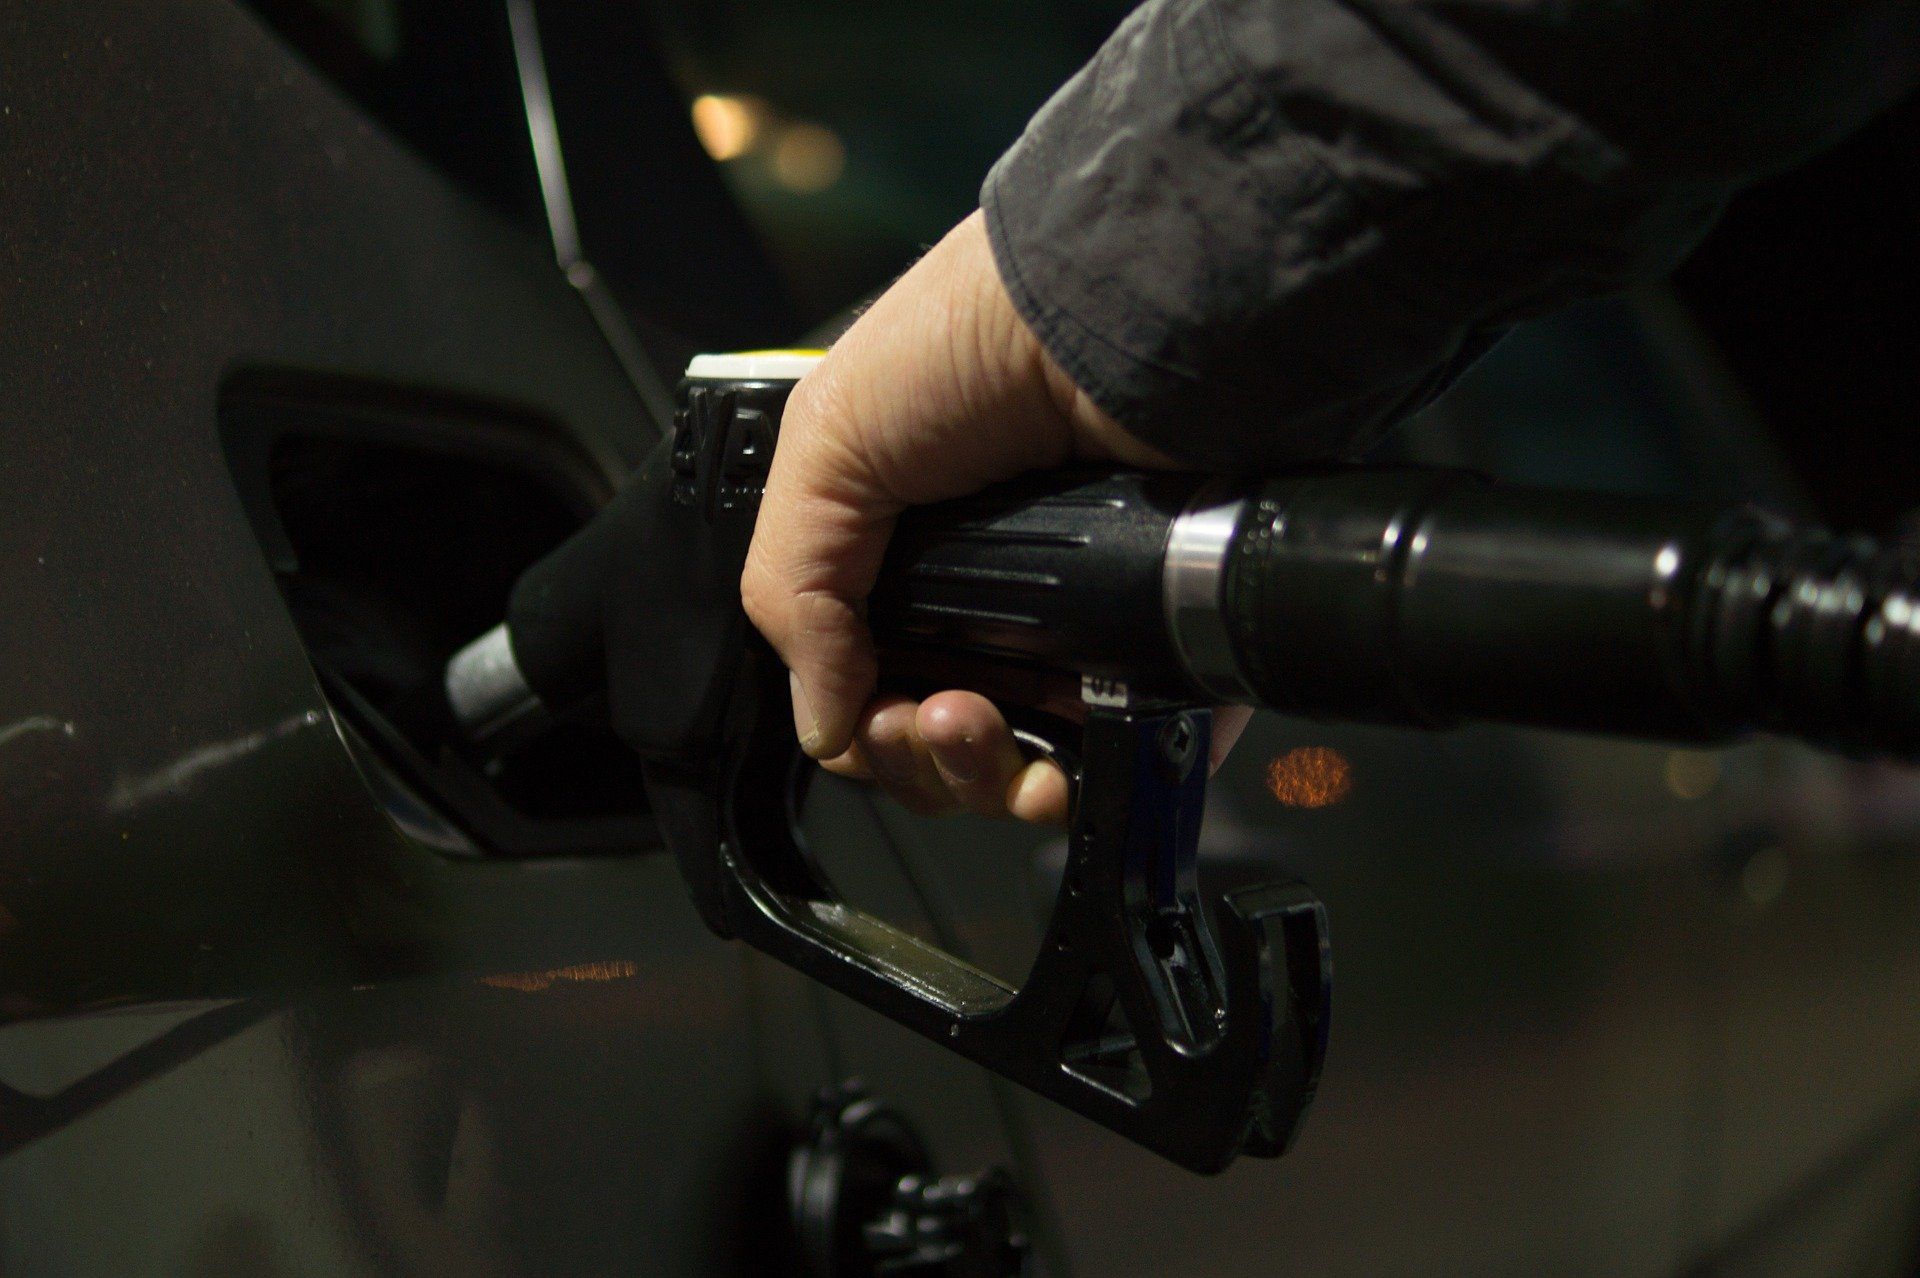 Fuel prices: Petrol priced at Rs 95.41, diesel Rs 86.67 in Delhi on March 17, 2022